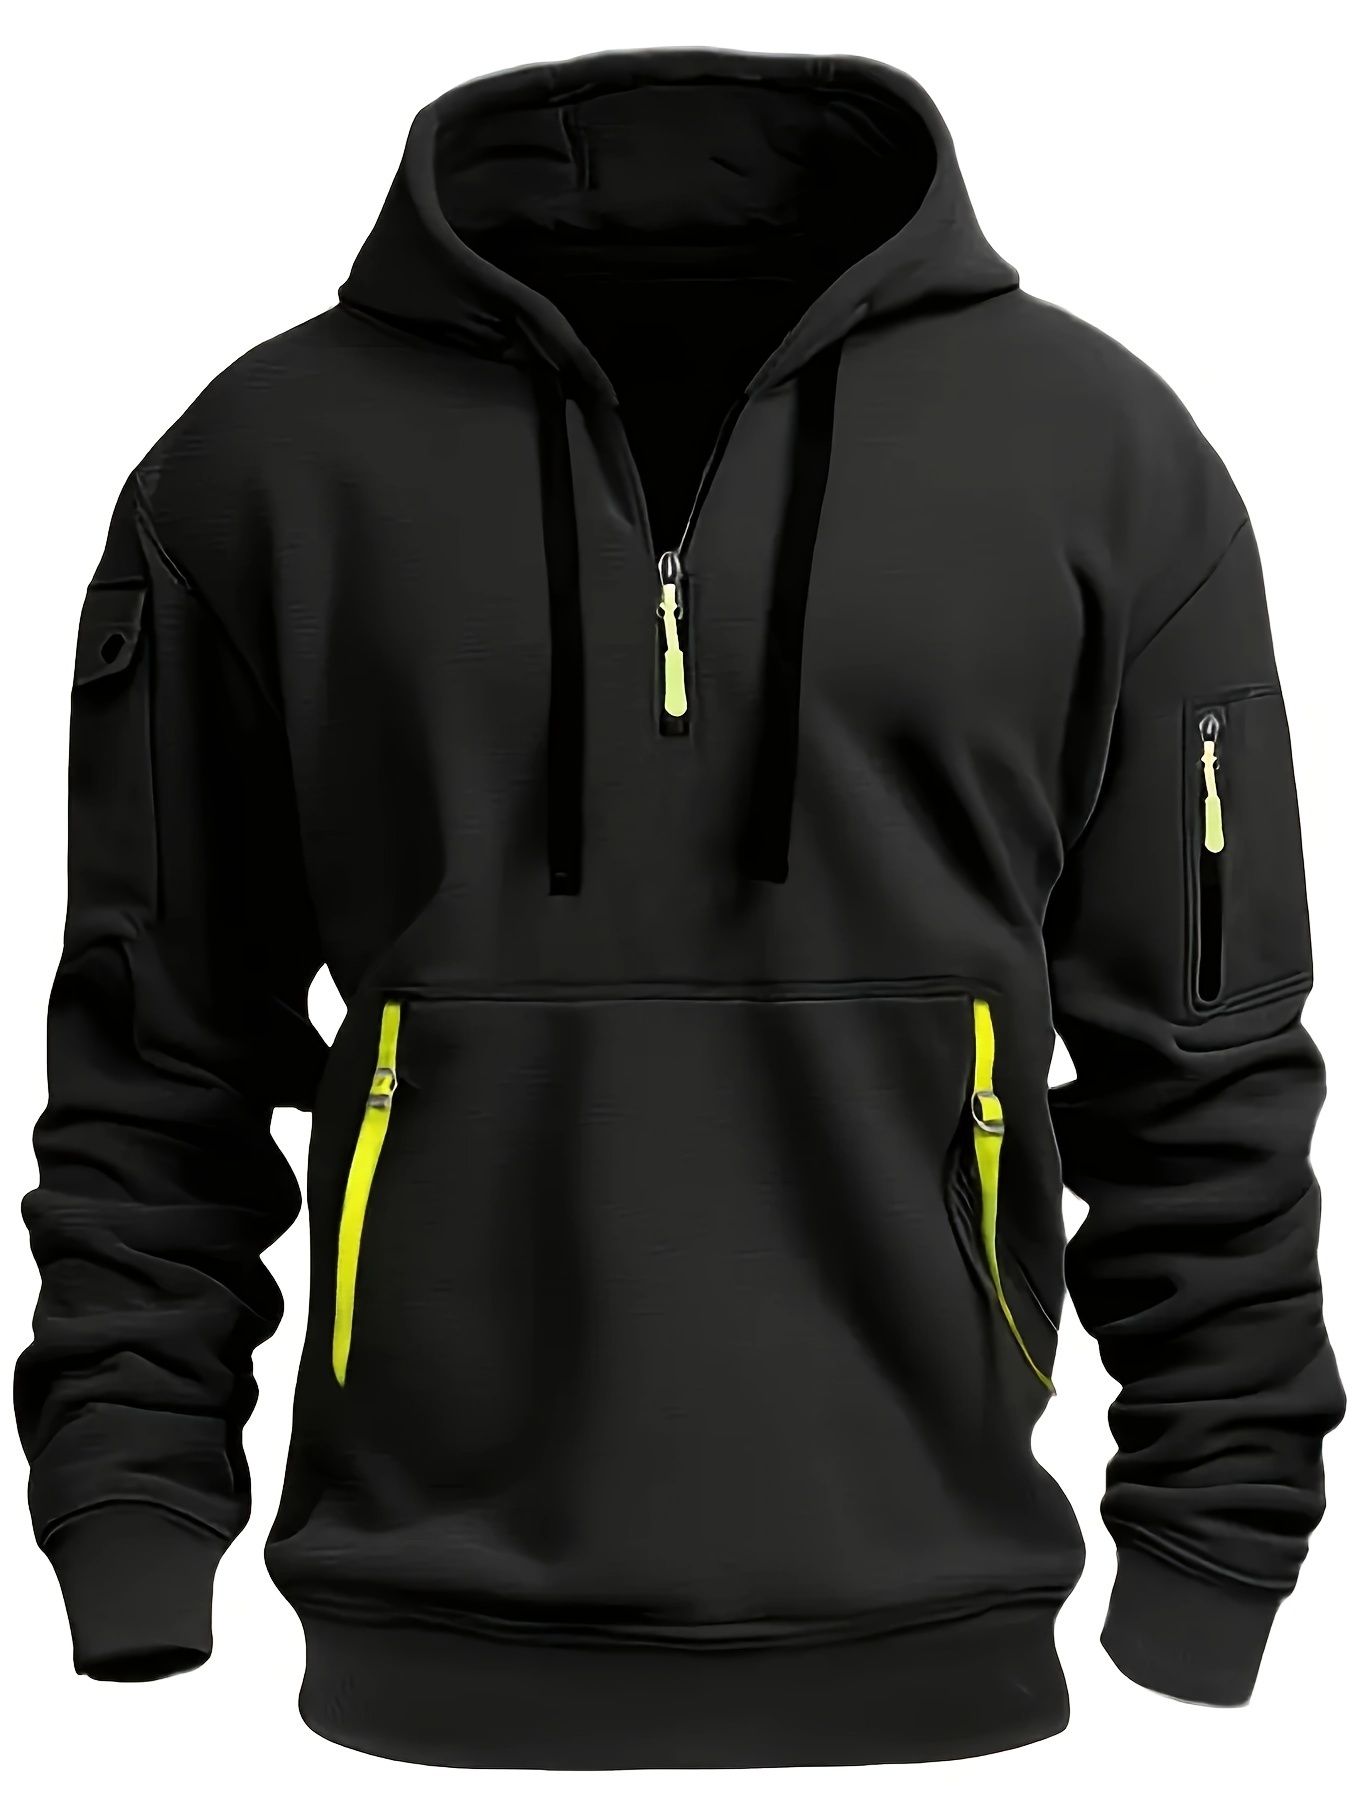 mens fashion half zipped sports hoodie with pockets casual athletic pullover comfortable fit sweatshirt with hood details 16